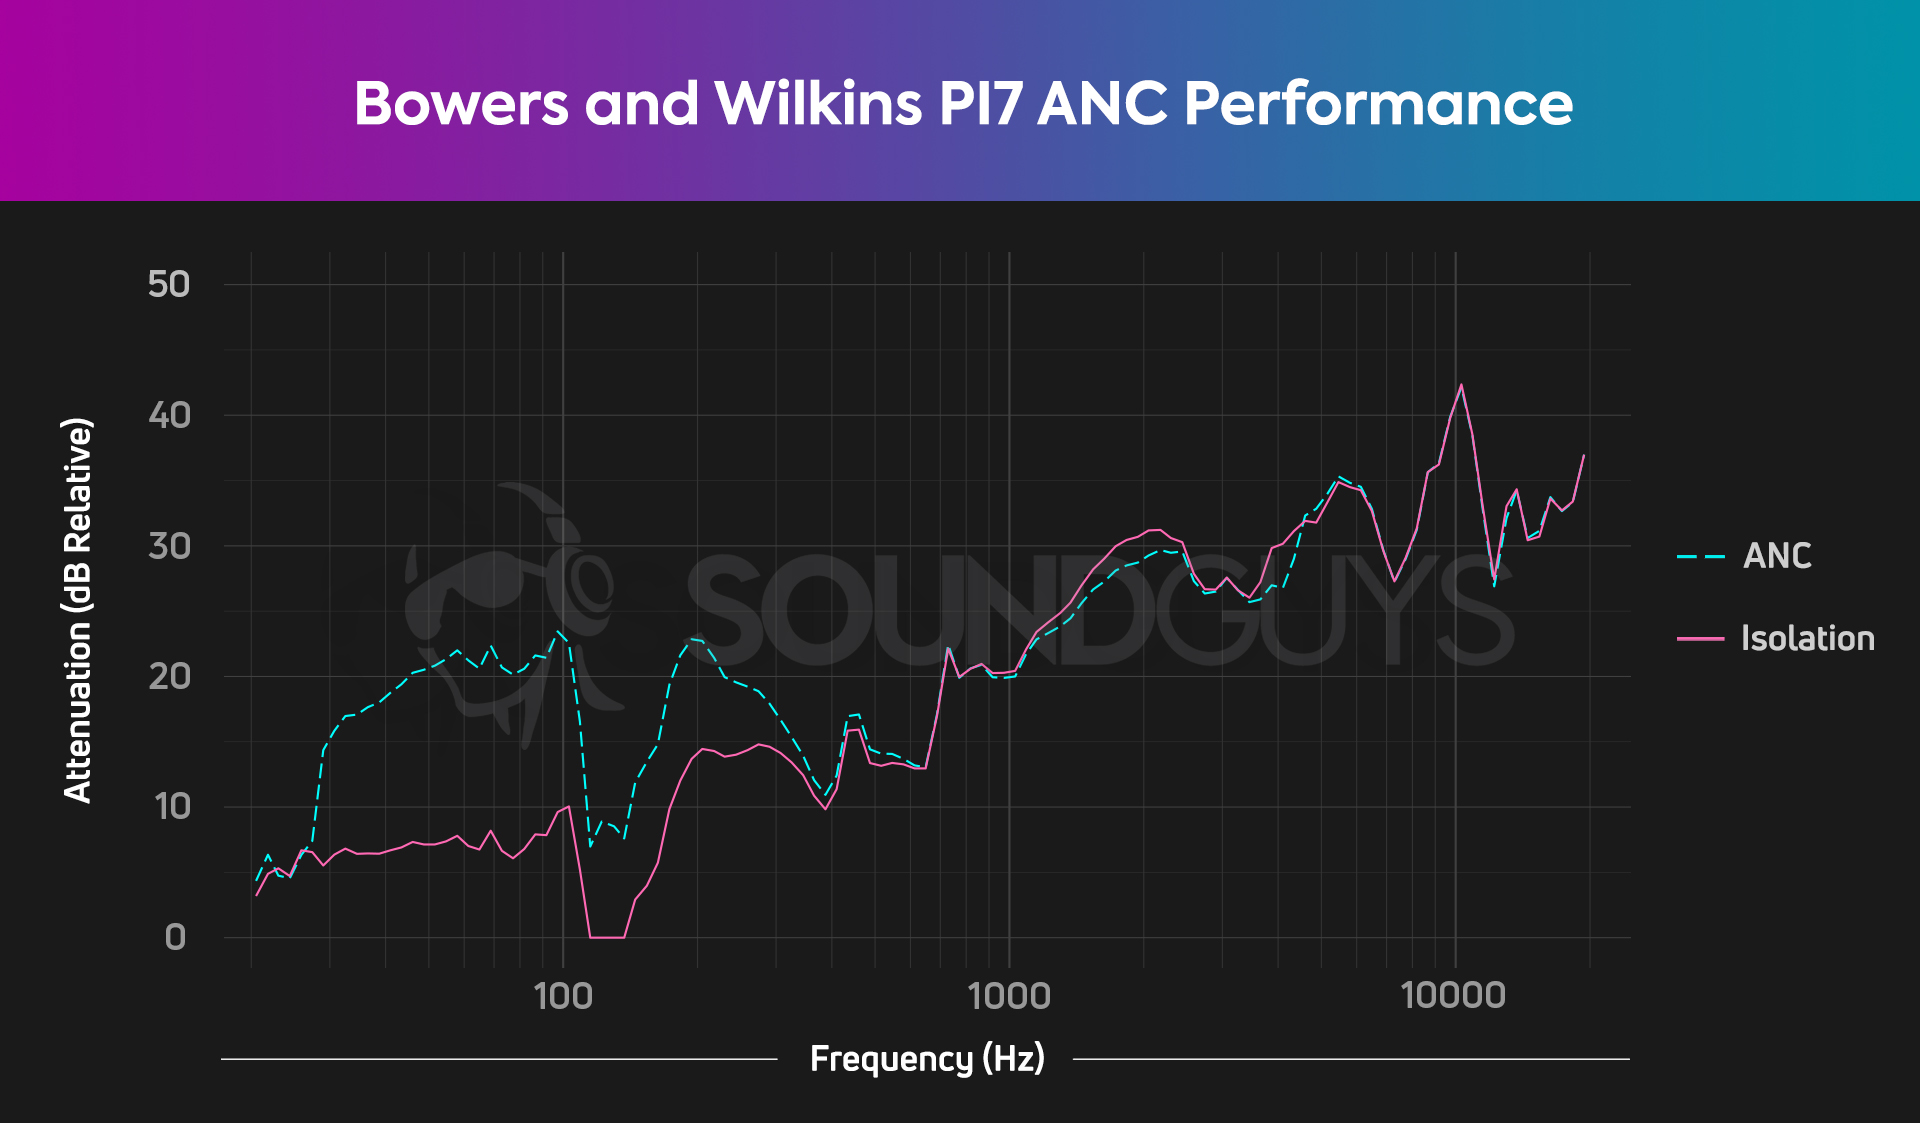 A chart showing the passive isolation and ANC of the Bowers and Wilkins PI7